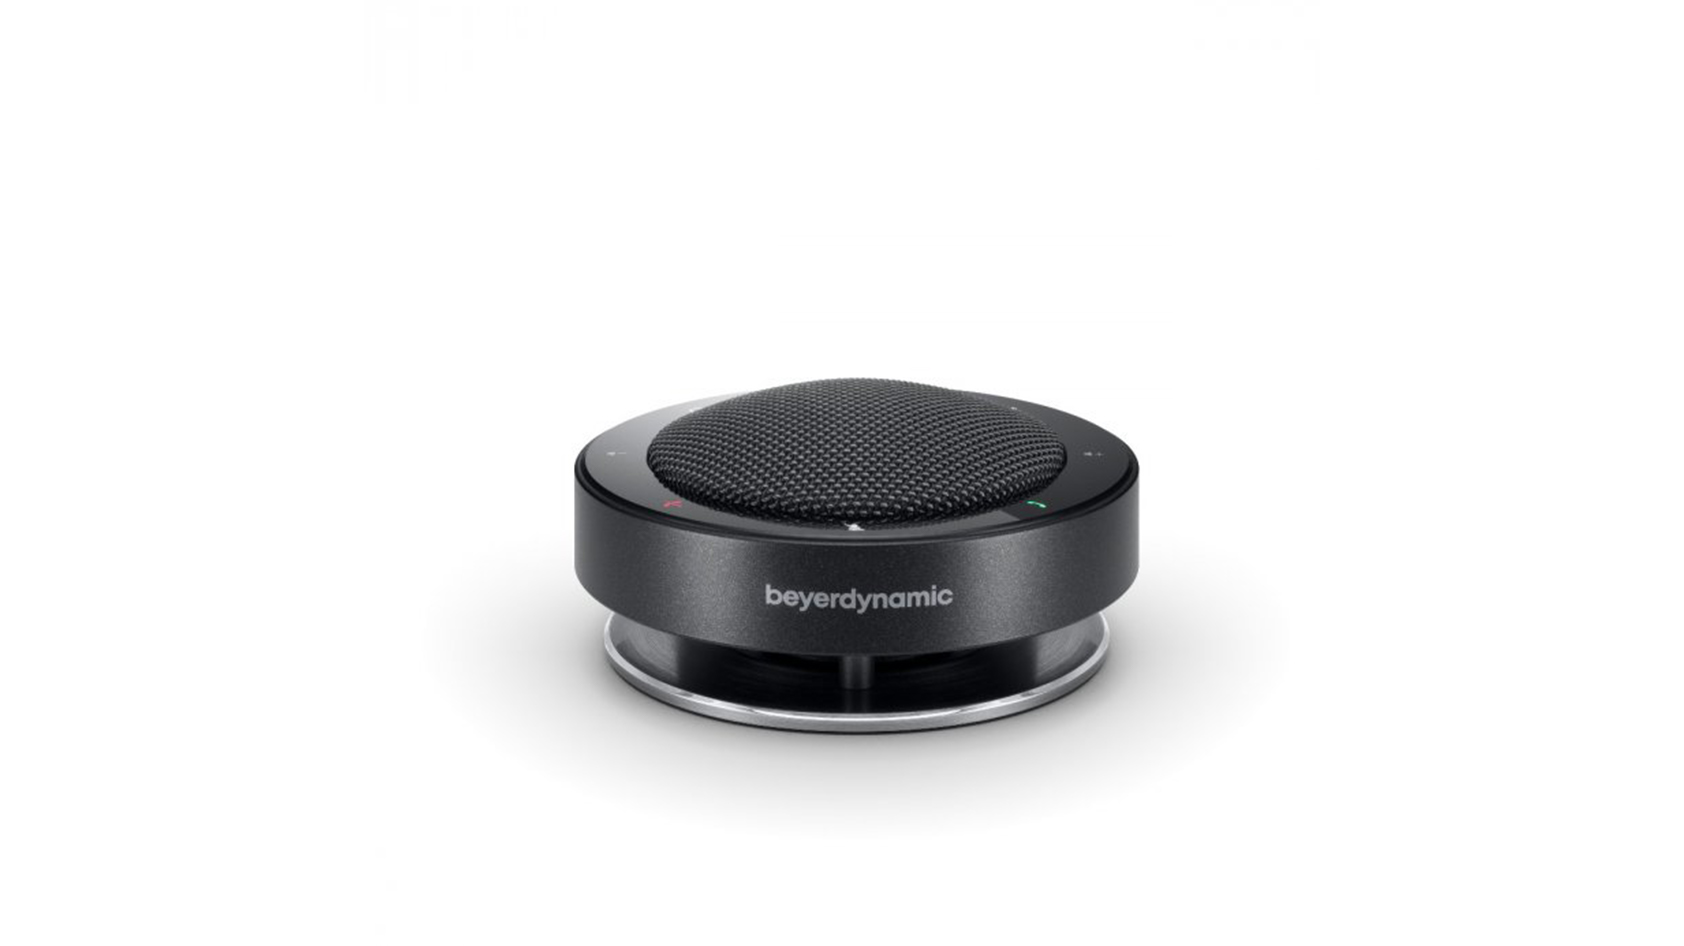 Product photo of Beyerdynamic Phonum for conference calls.